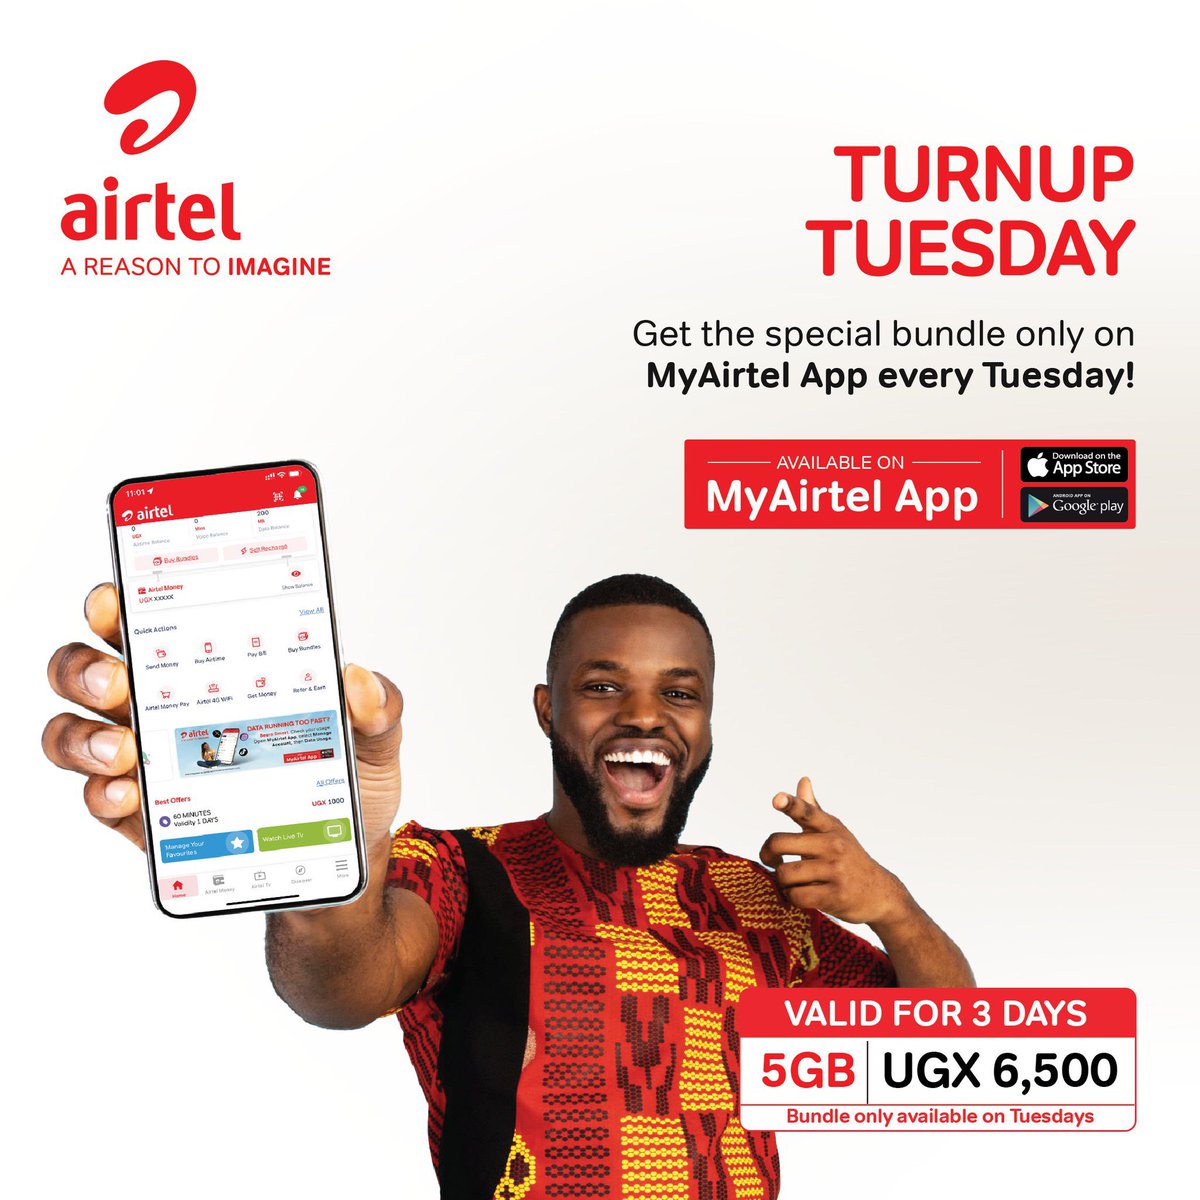 Tuesday treats are here! Get your special bundle only on MyAirtel App every Tuesday! 

Visit: airtelafrica.onelink.me/cGyr/qgj4qeu2 to buy.

Don’t miss out!

#TurnUpTuesday